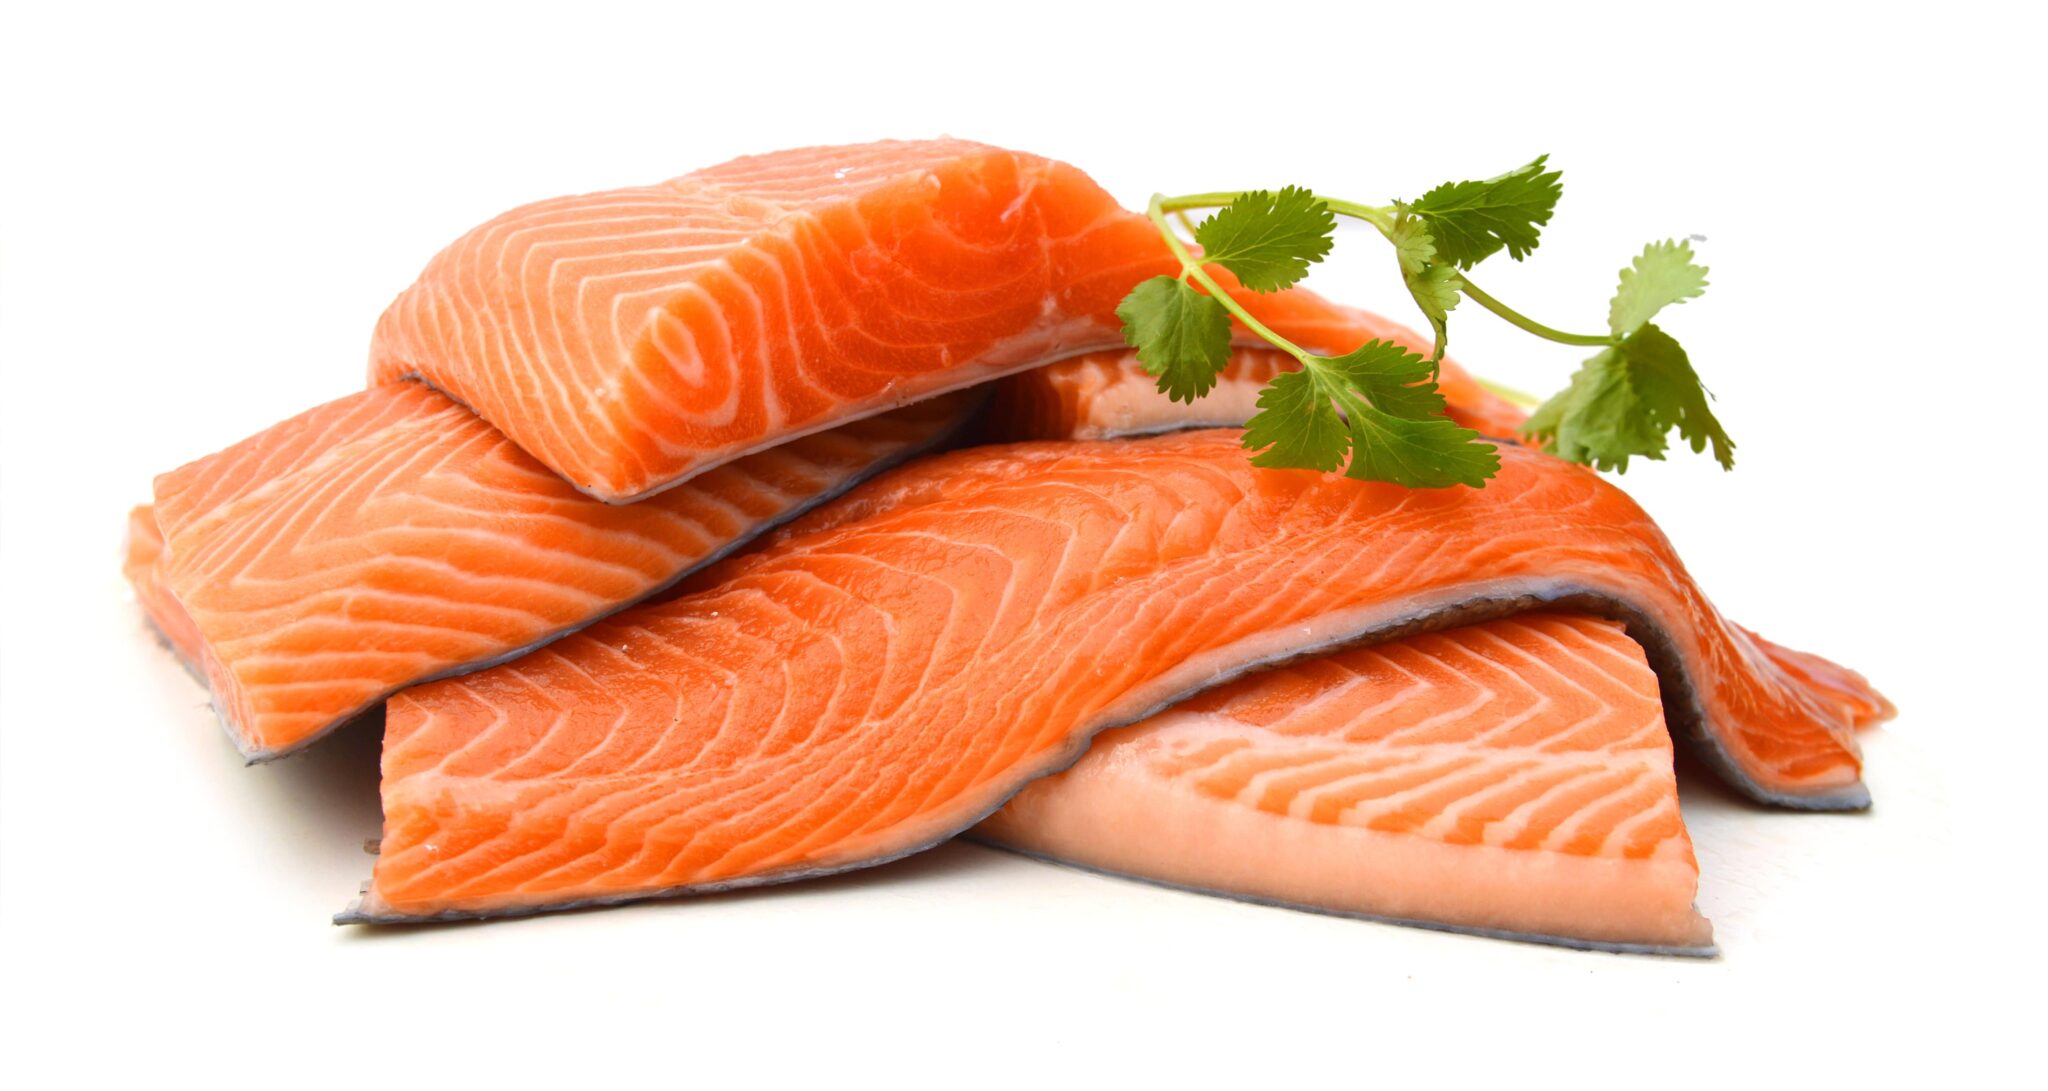 3D X-ray Food Inspection for the Fish and Meat industry